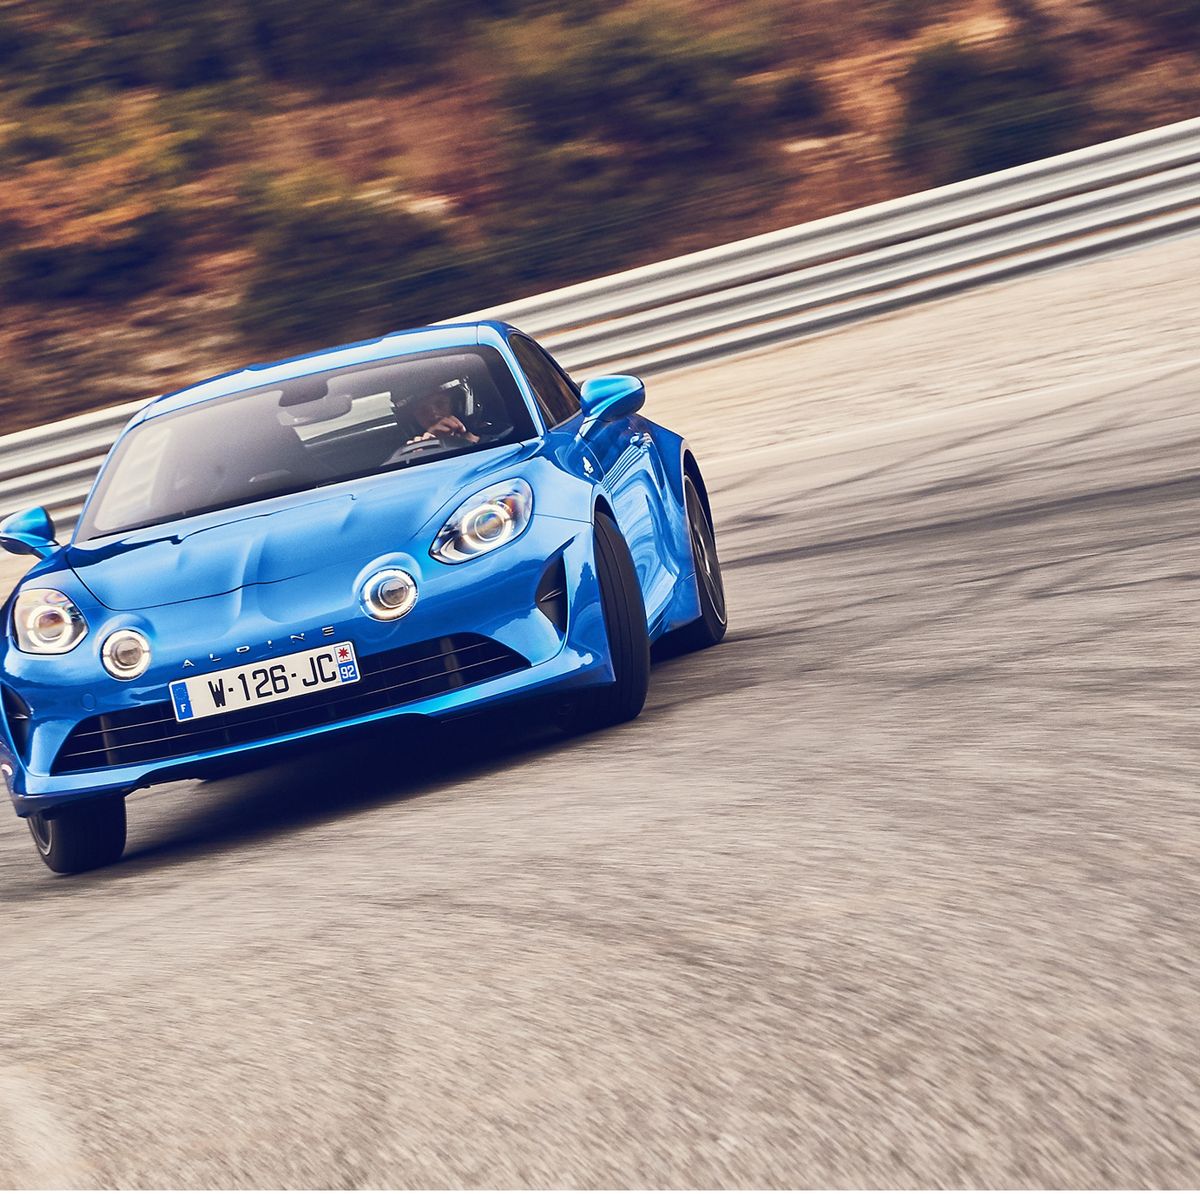 Renault Sport has changed its name to Alpine